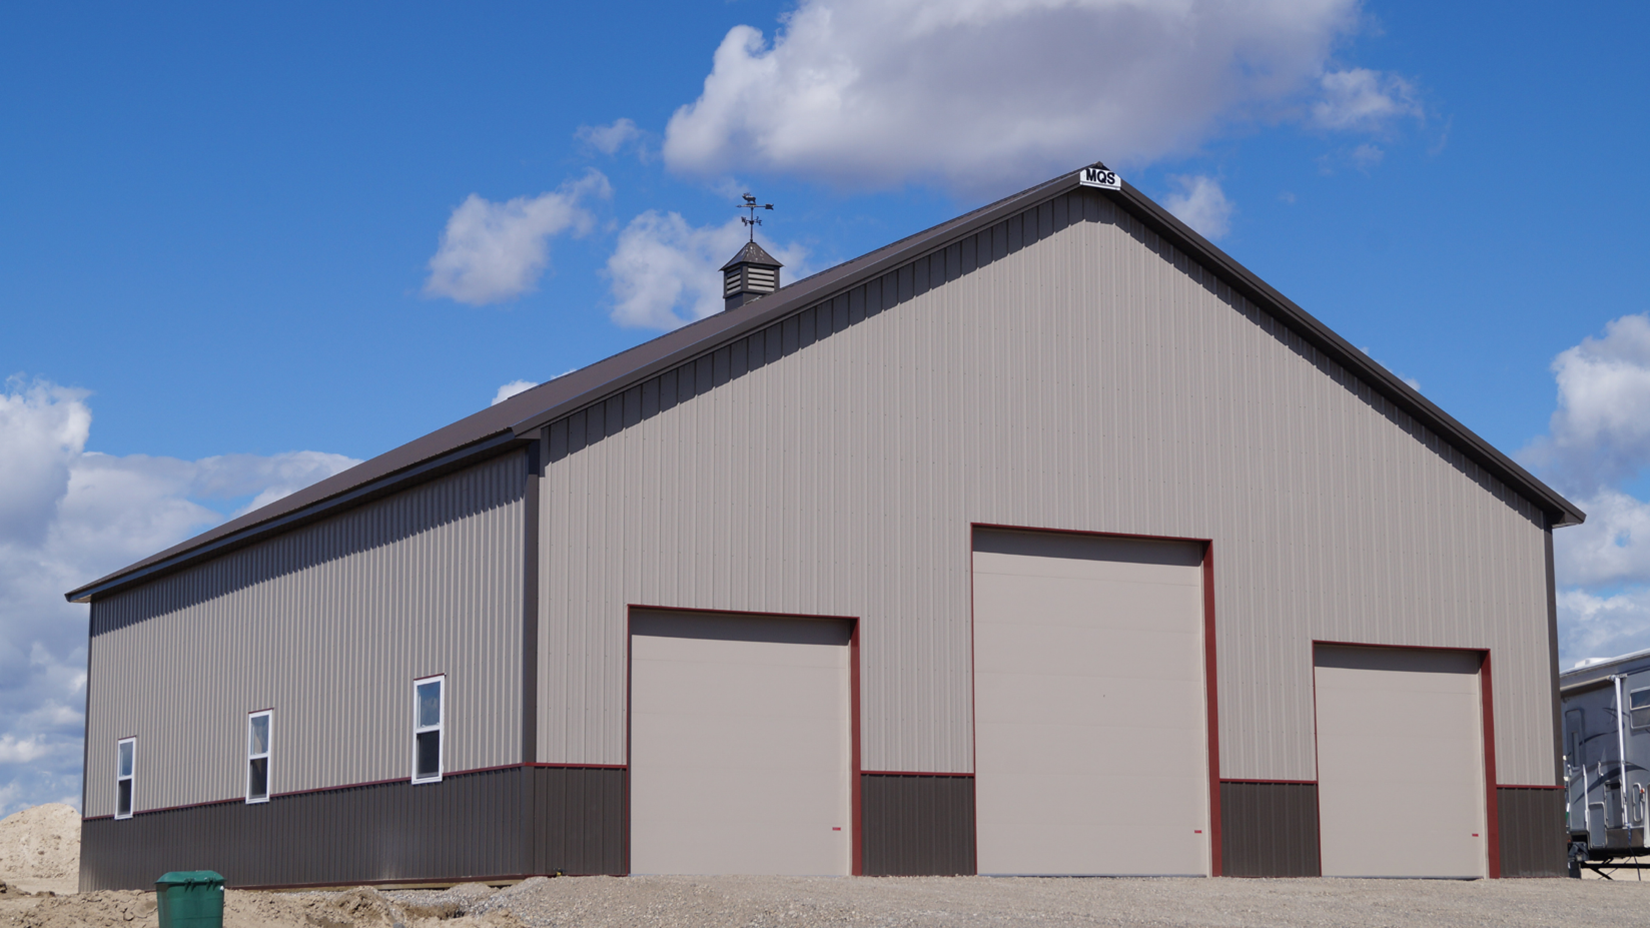 Lighting Options You Can Add to Montana Steel Buildings